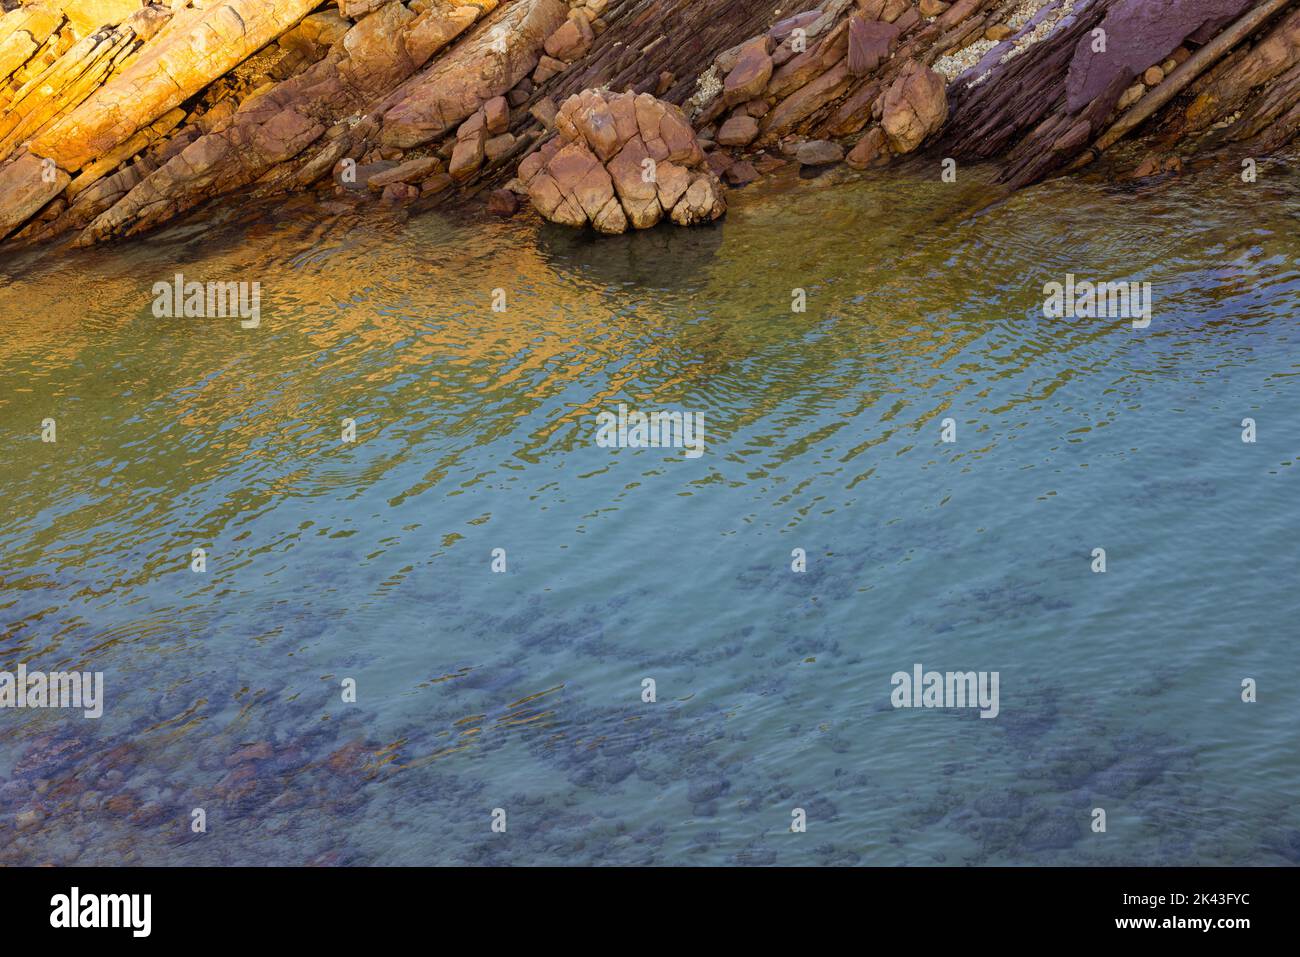 Landscape of sea shore with rocks and calm water with reflection Stock Photo